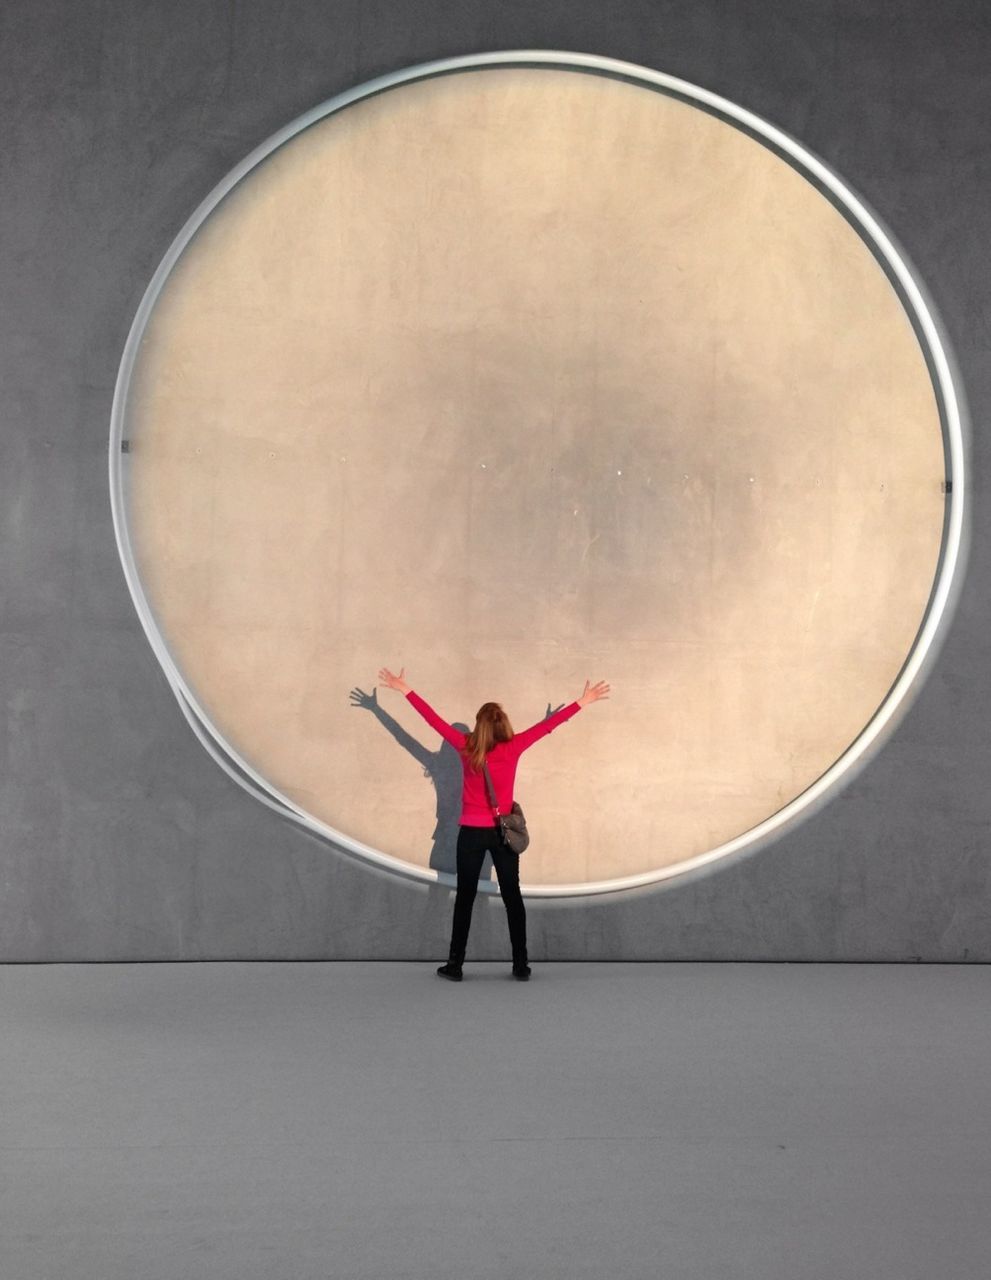 Woman with arms outstretched against round wall